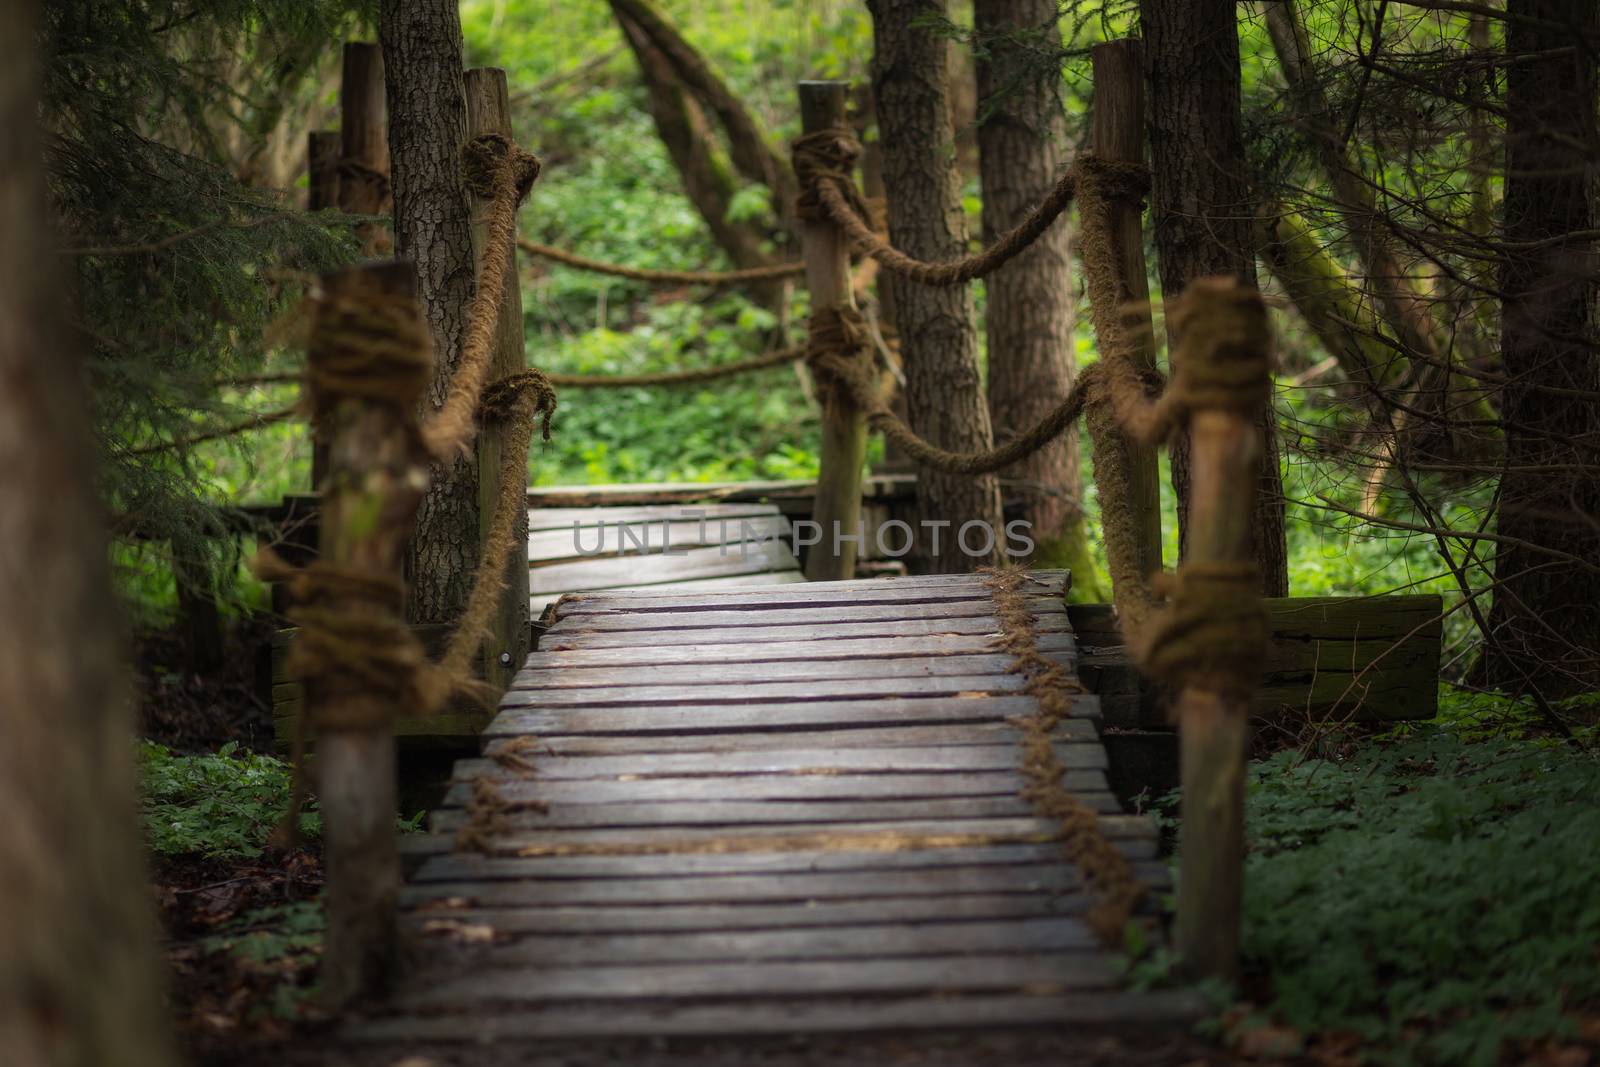 A small wooden bridge in the forest